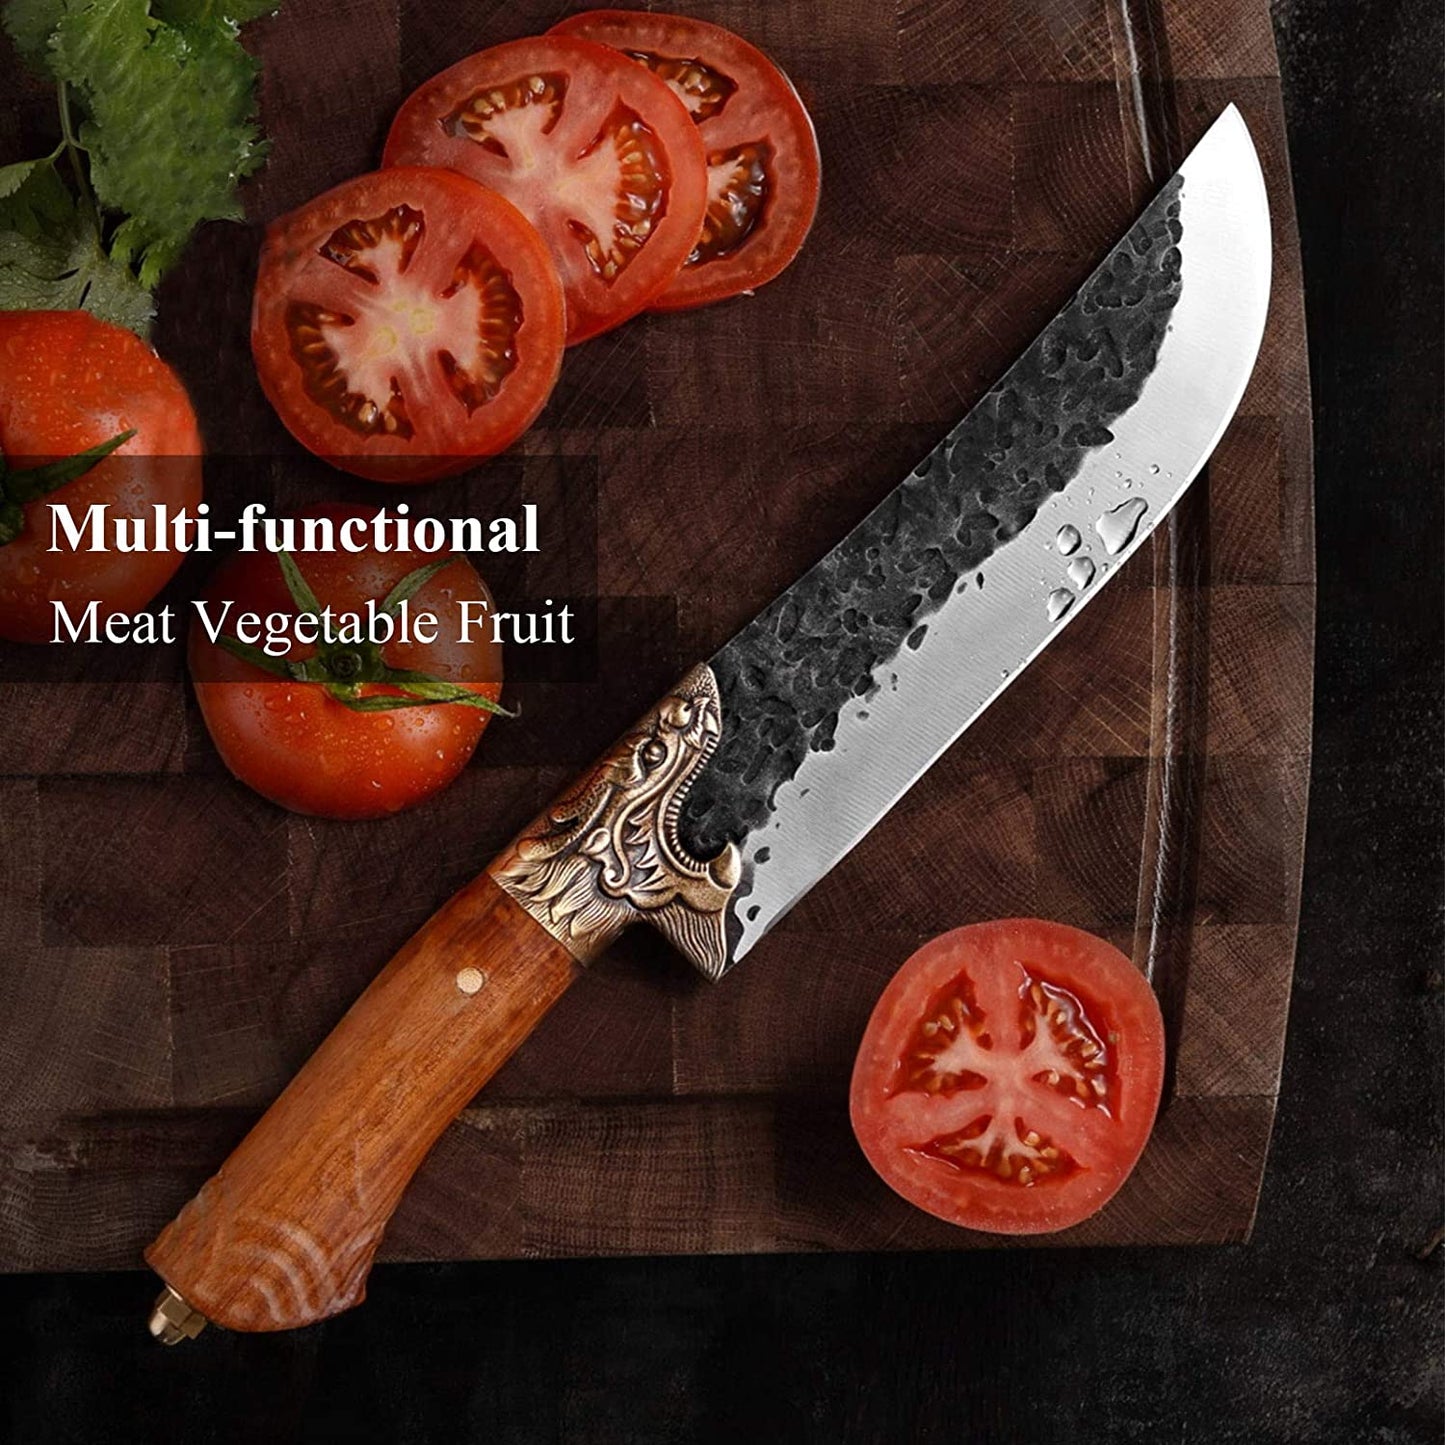 Dragon Knife - Kitchen Chef Knife Outdoor Camping Knife with Leather Sheath Forged Cleaver Butcher Boning Knives for Home Gift Collection BBQ